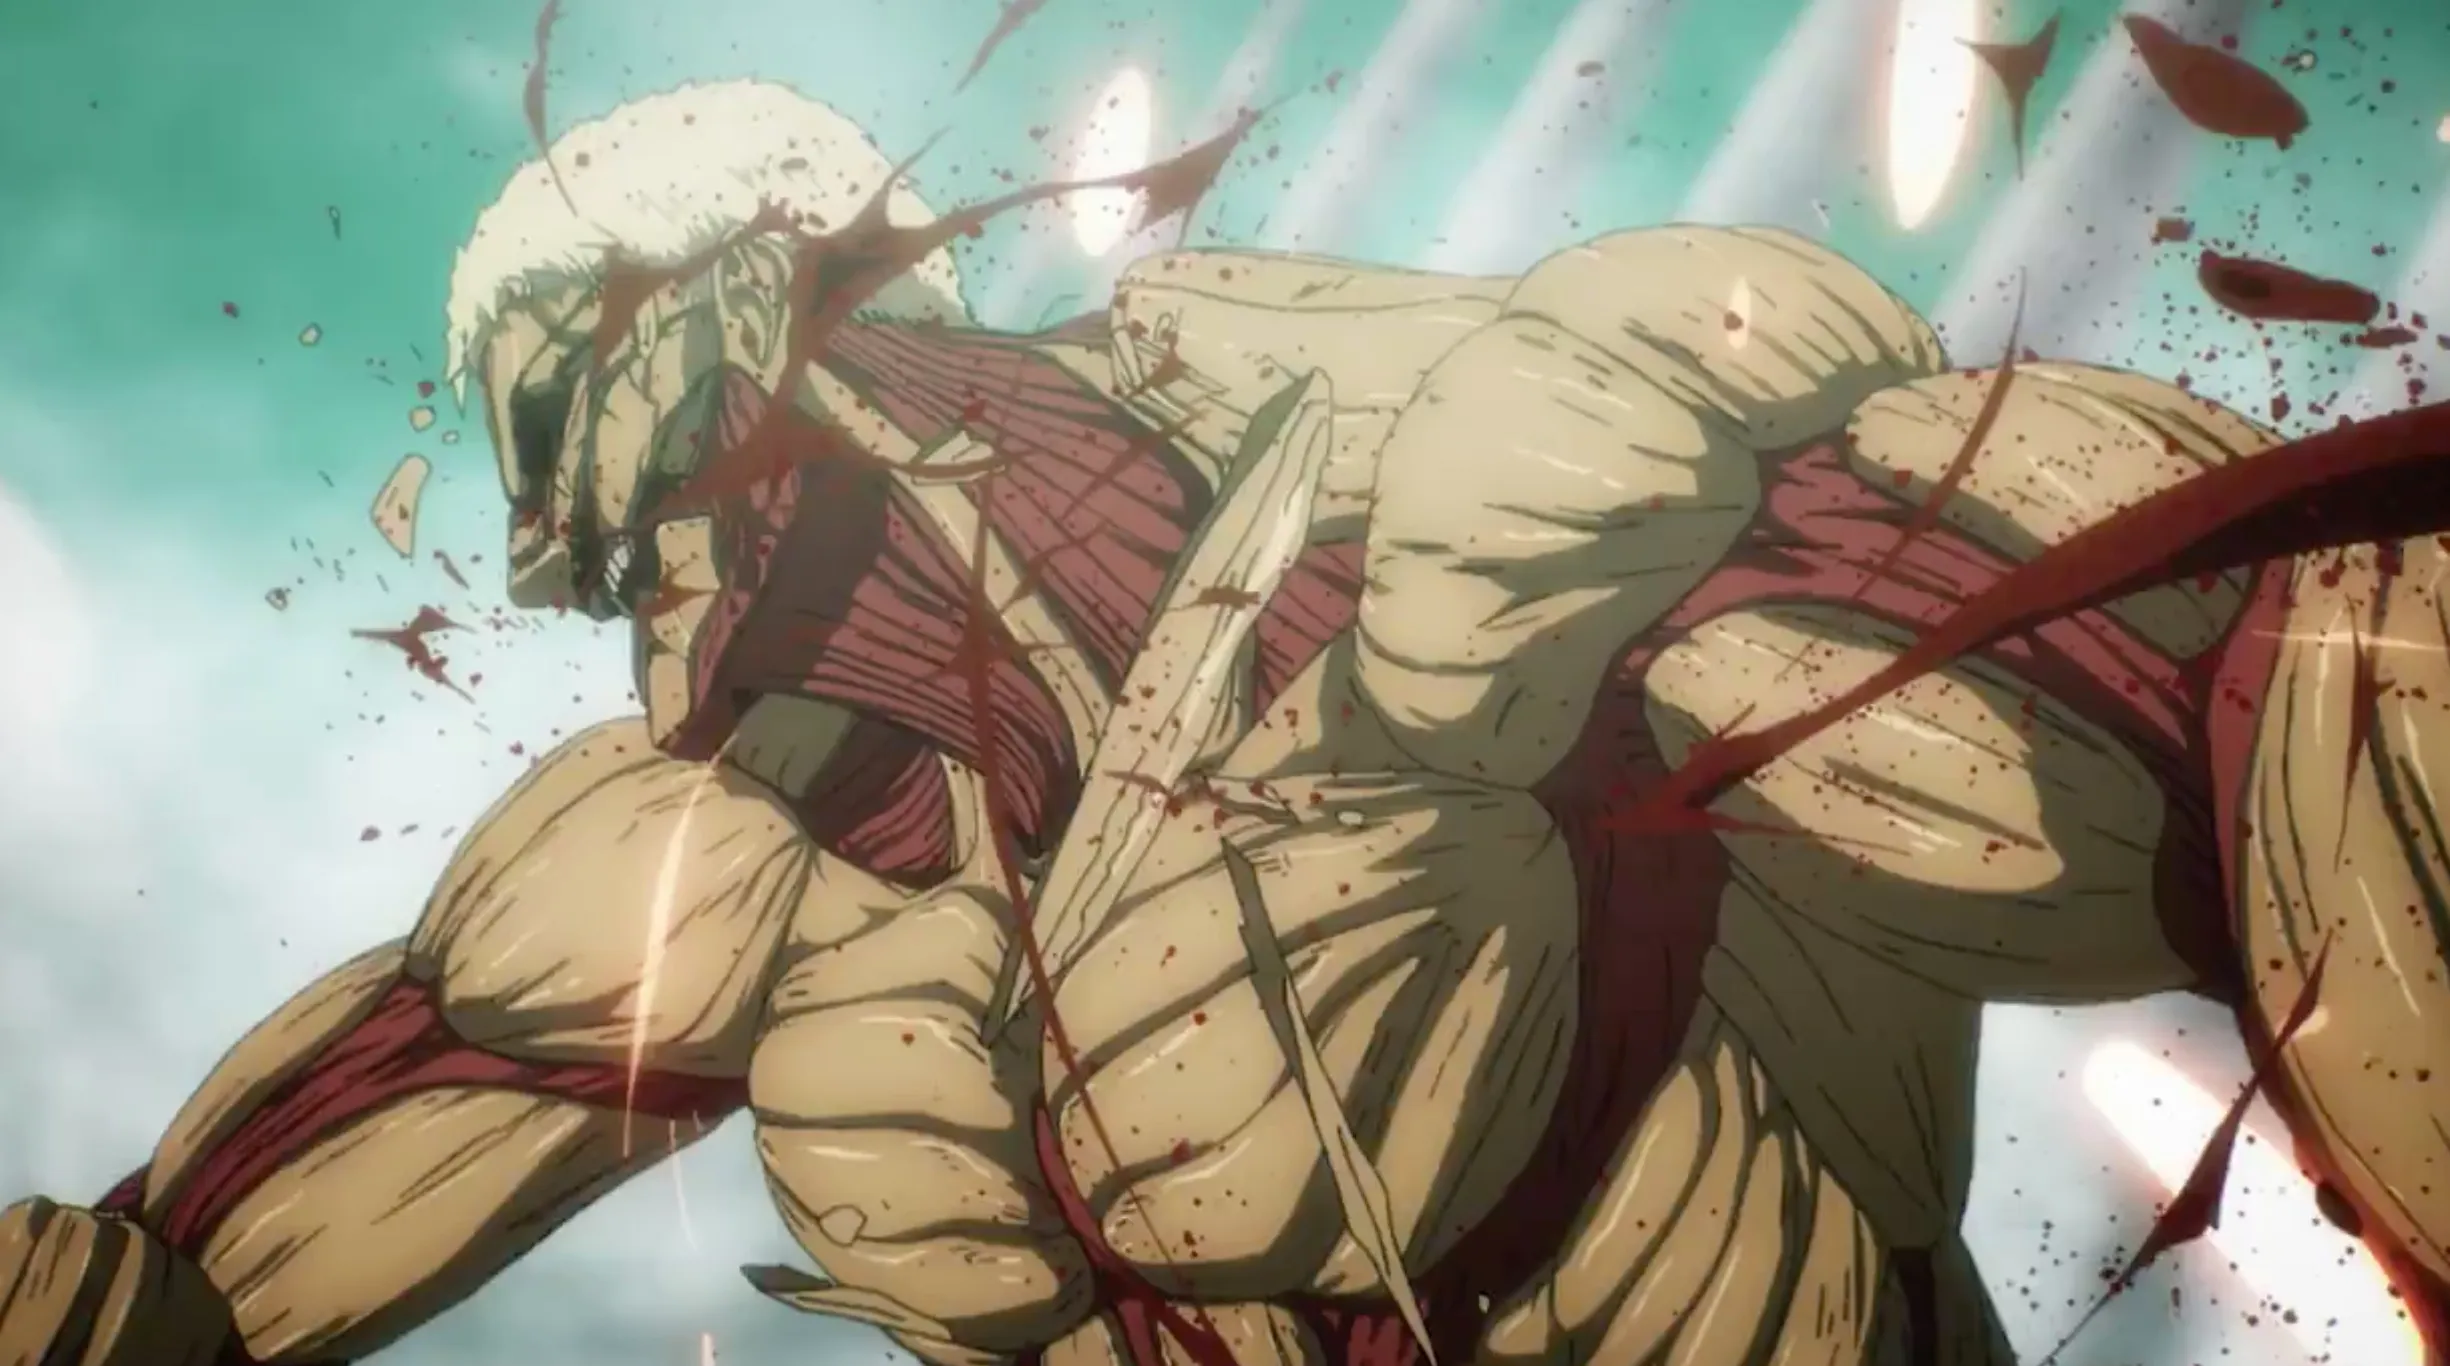 Attack on Titan S4 Final Episode Release date & Timezone + Where to watch?